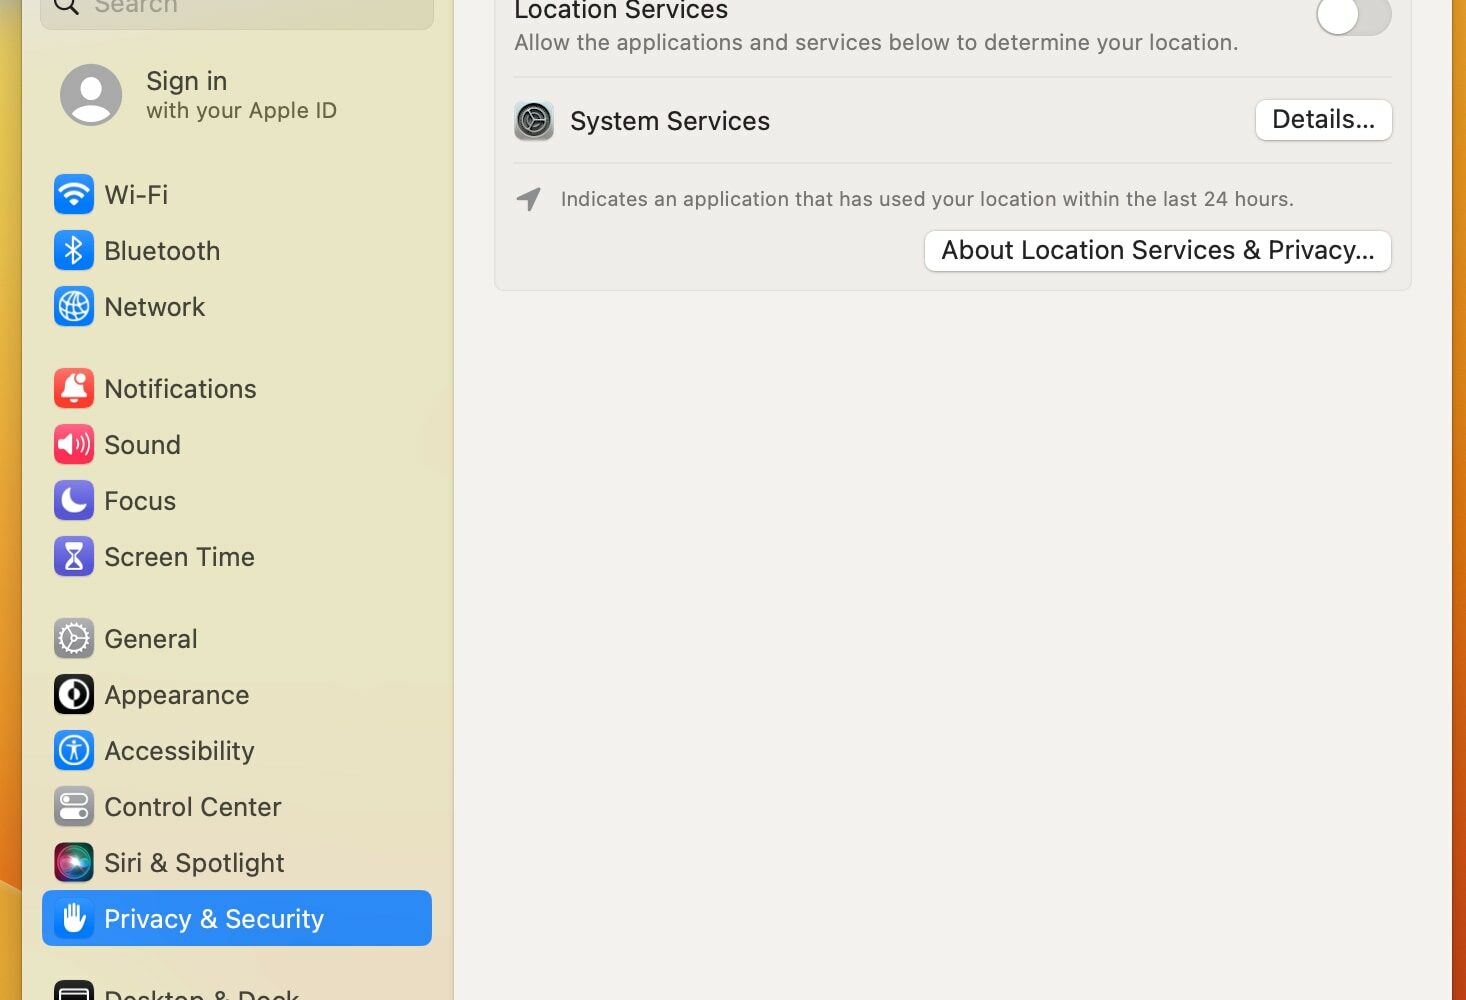 Location services settings in macOS Ventura with no apps listed